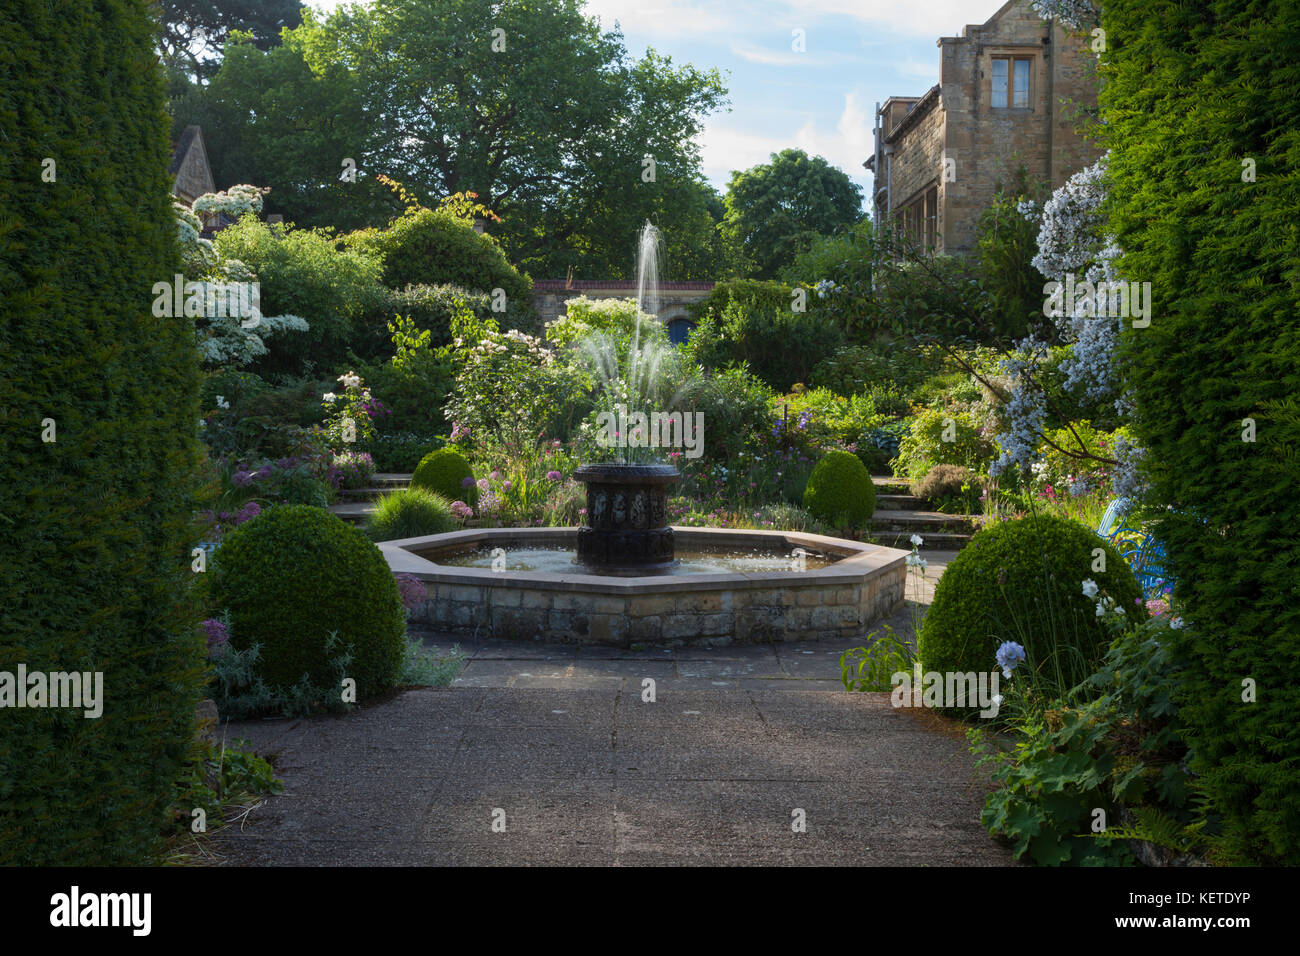 The White Sunk Garden and ornamental fountain backlit by early morning sunlight at Kiftsgate Court, Cotswolds, Gloucestershire, England. Stock Photo